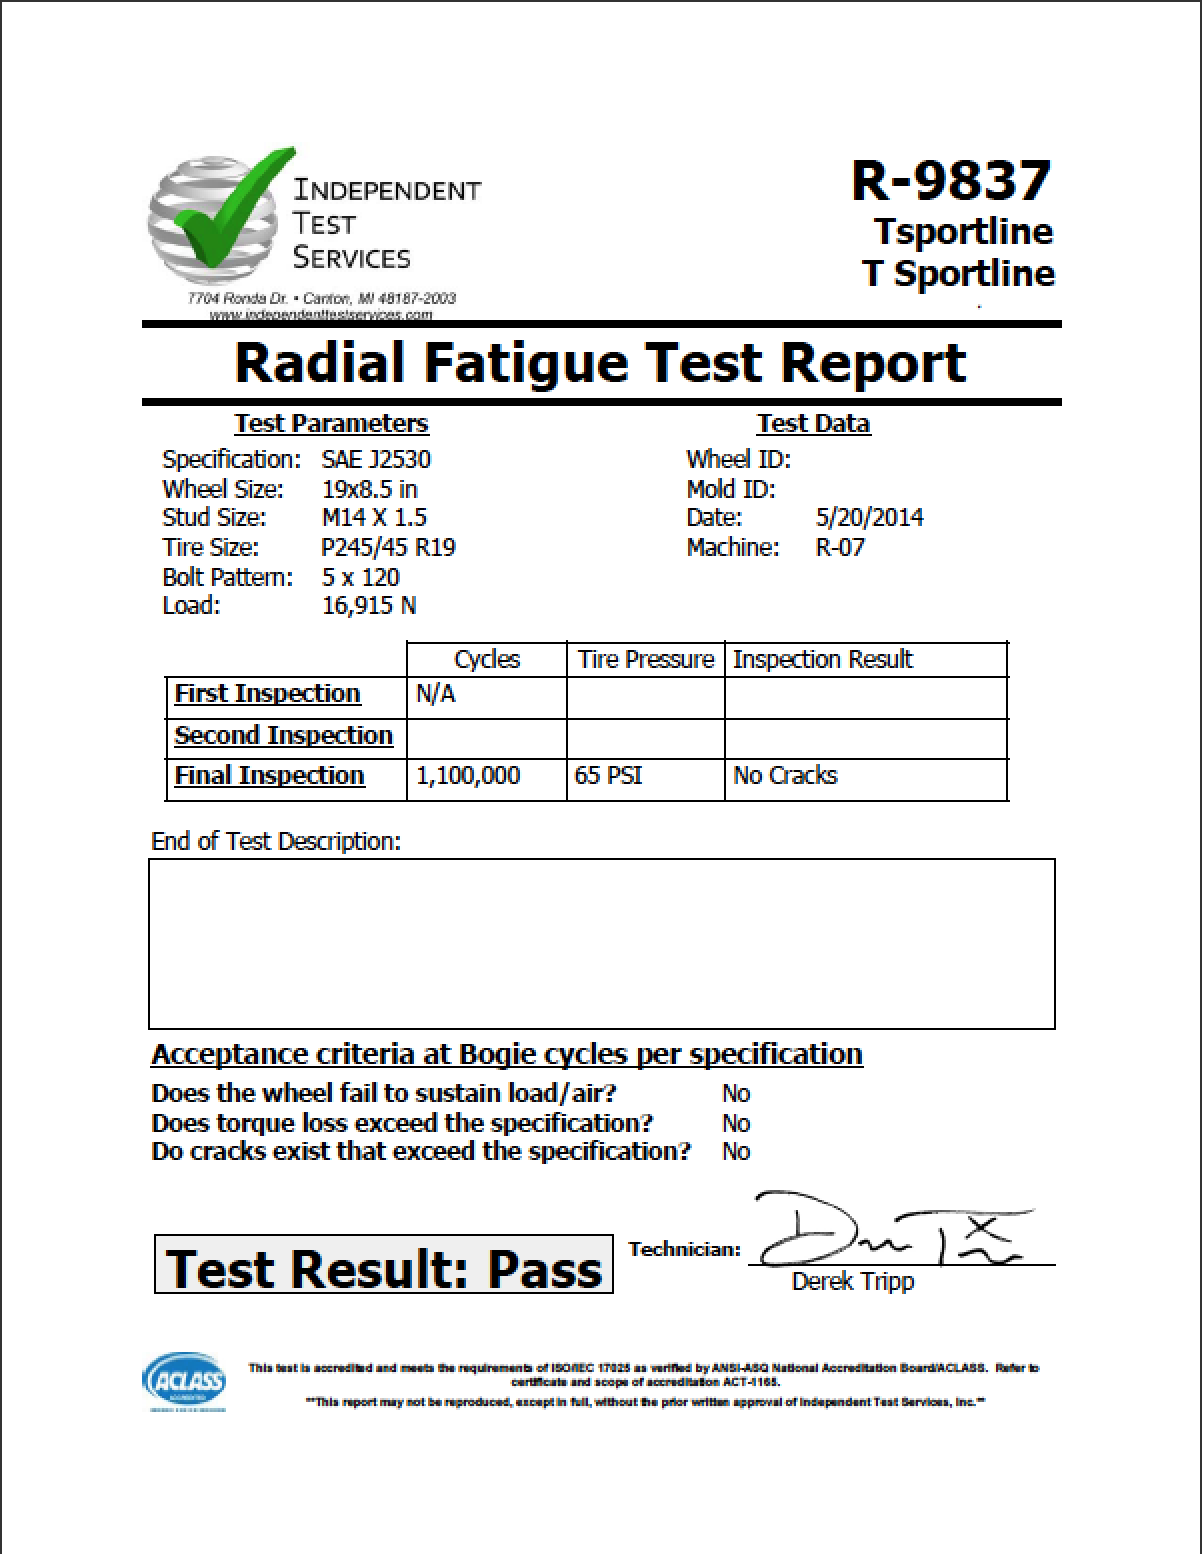 TST-Radial-Fatigue-Test-Report.png